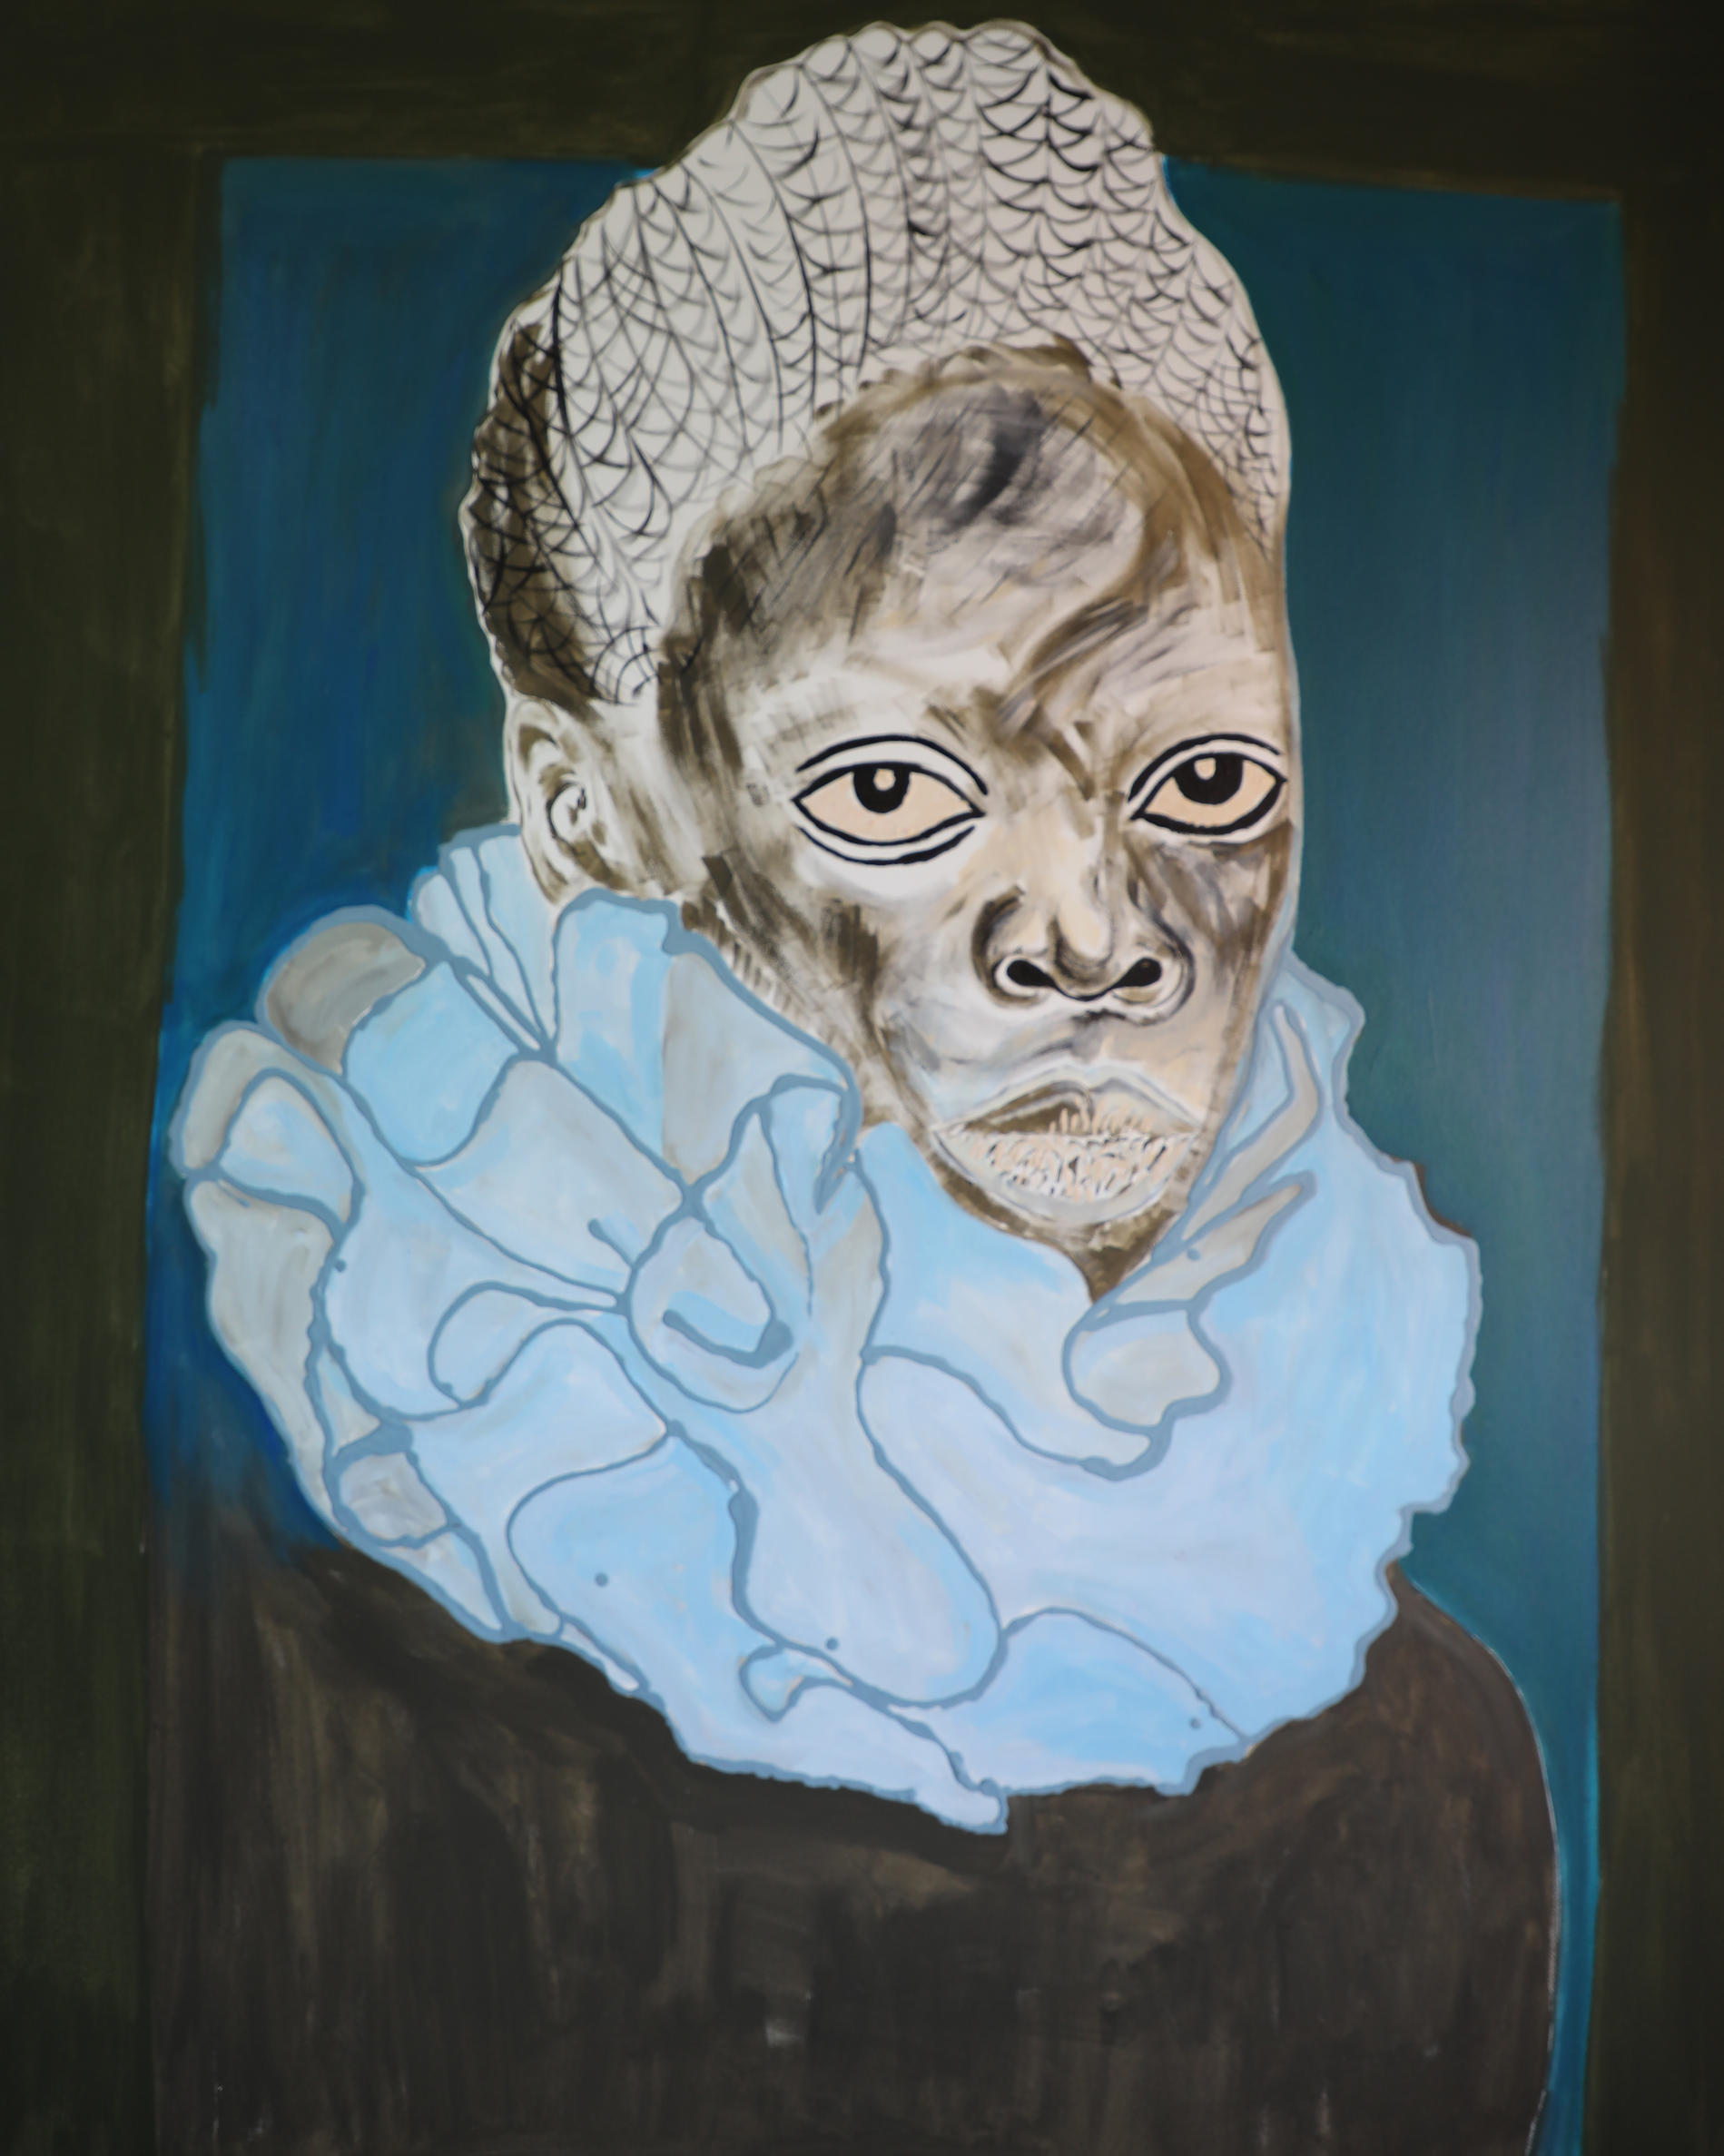 A painting of a person with a ruffled collar and white crown on a blue background.